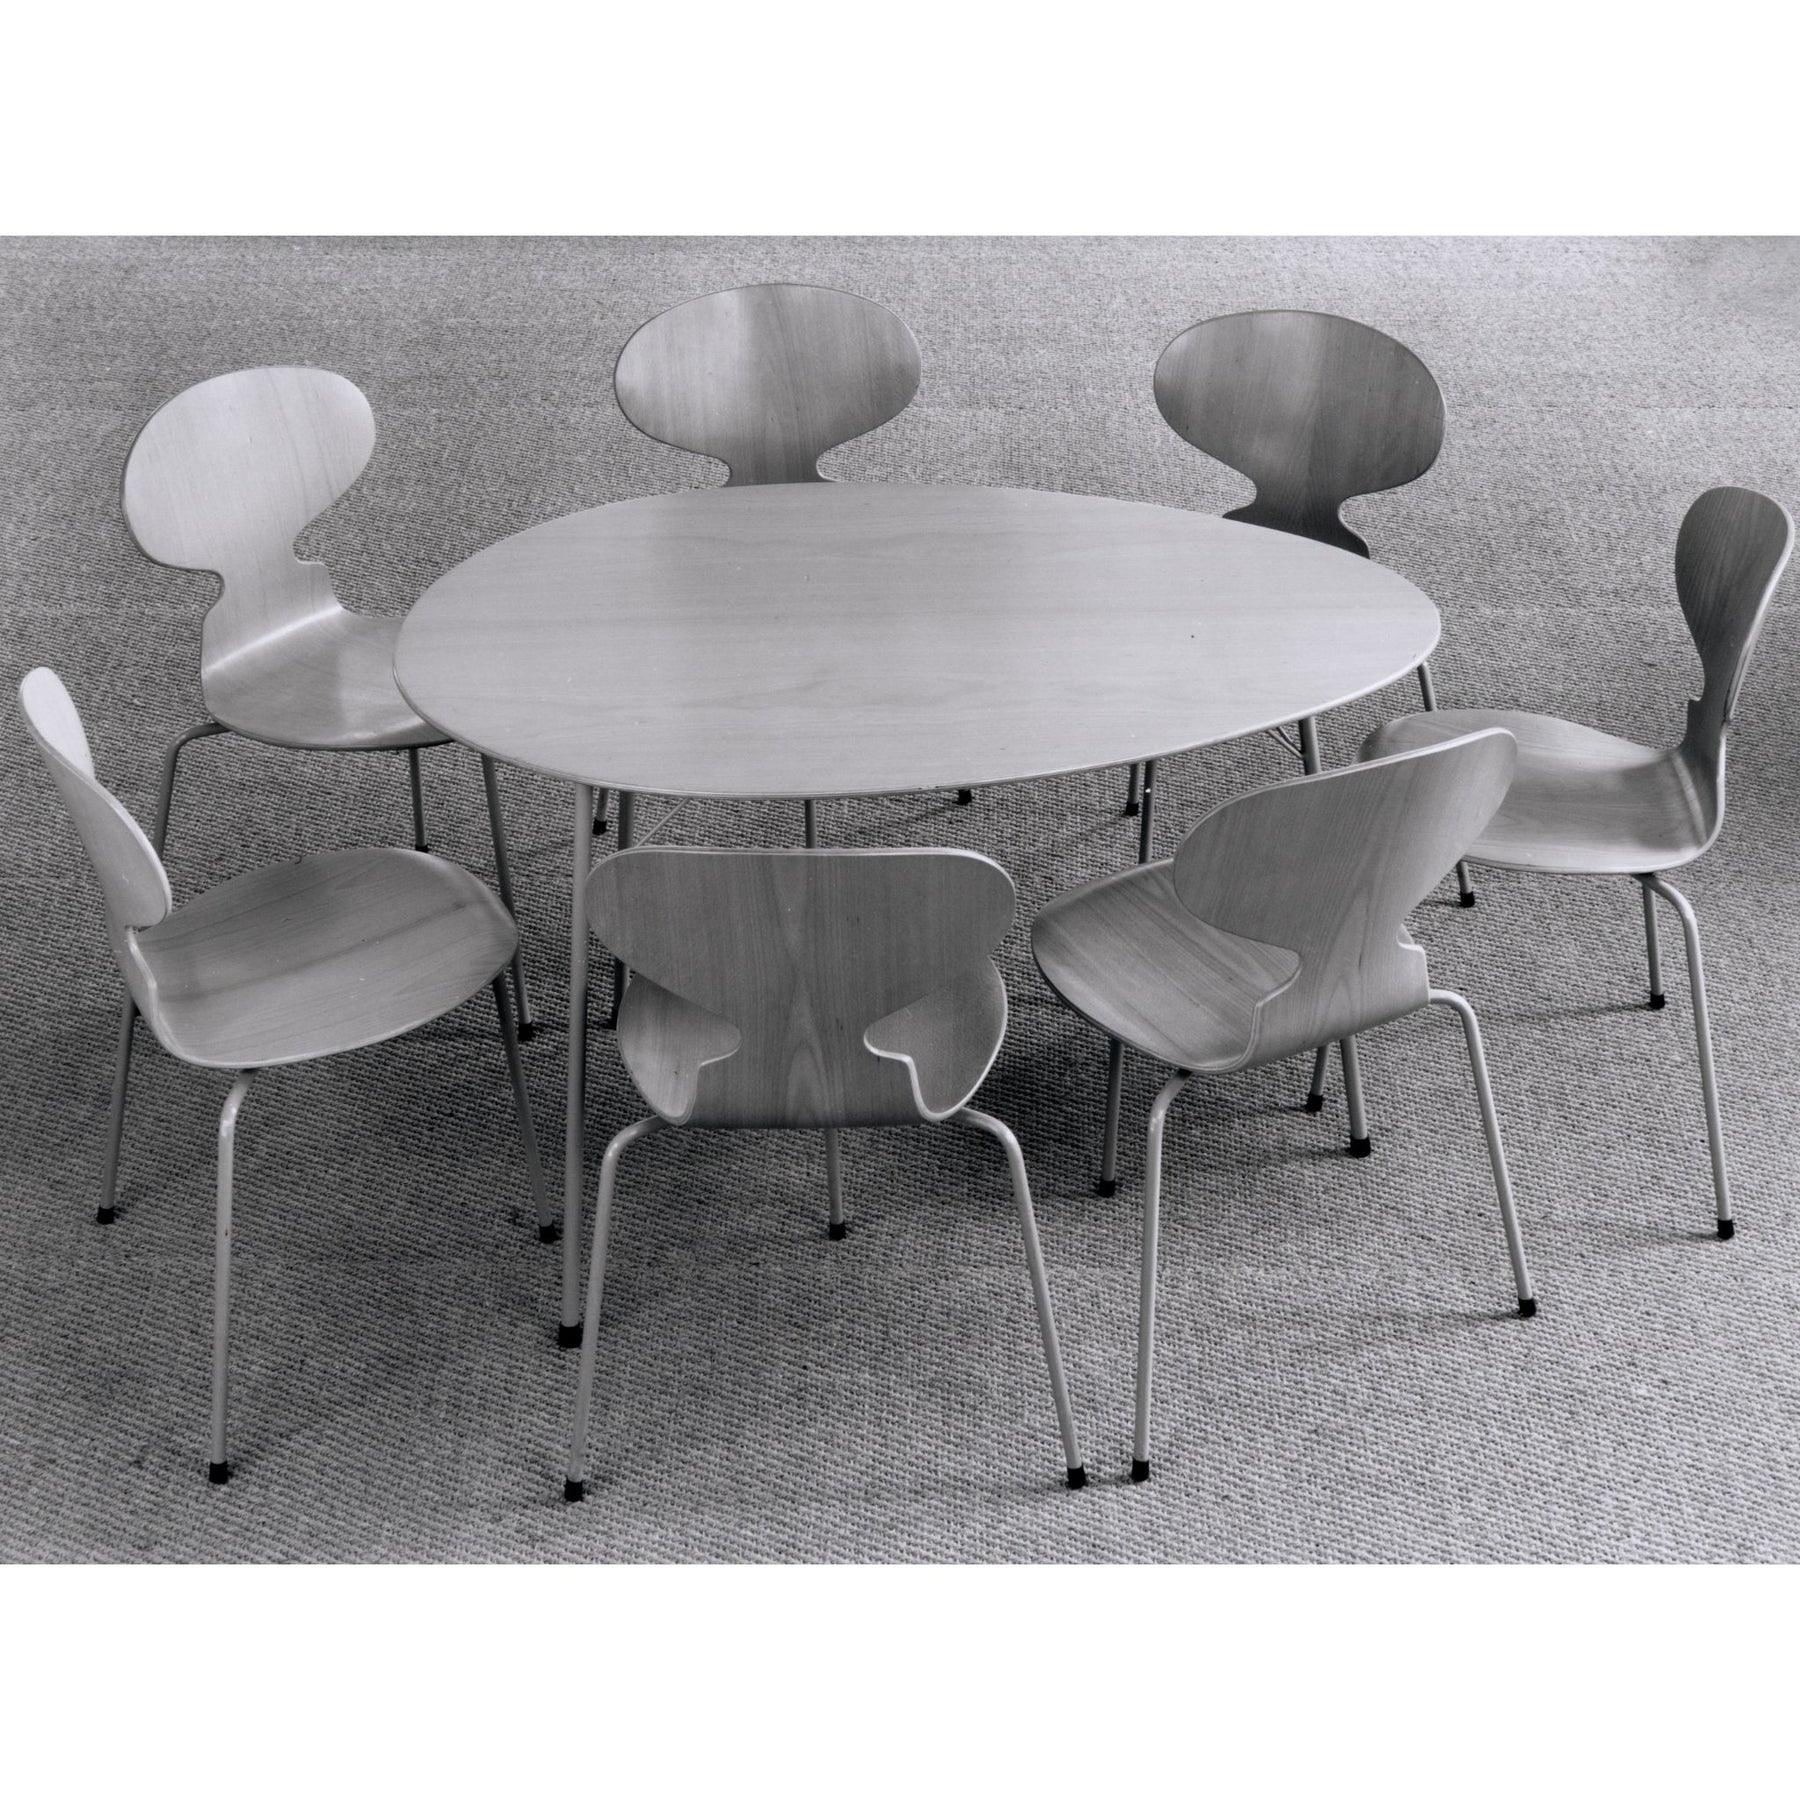 Fritz Hansen Egg Table and Ant Chairs by Arne Jacobsen Archival Photo from 1952